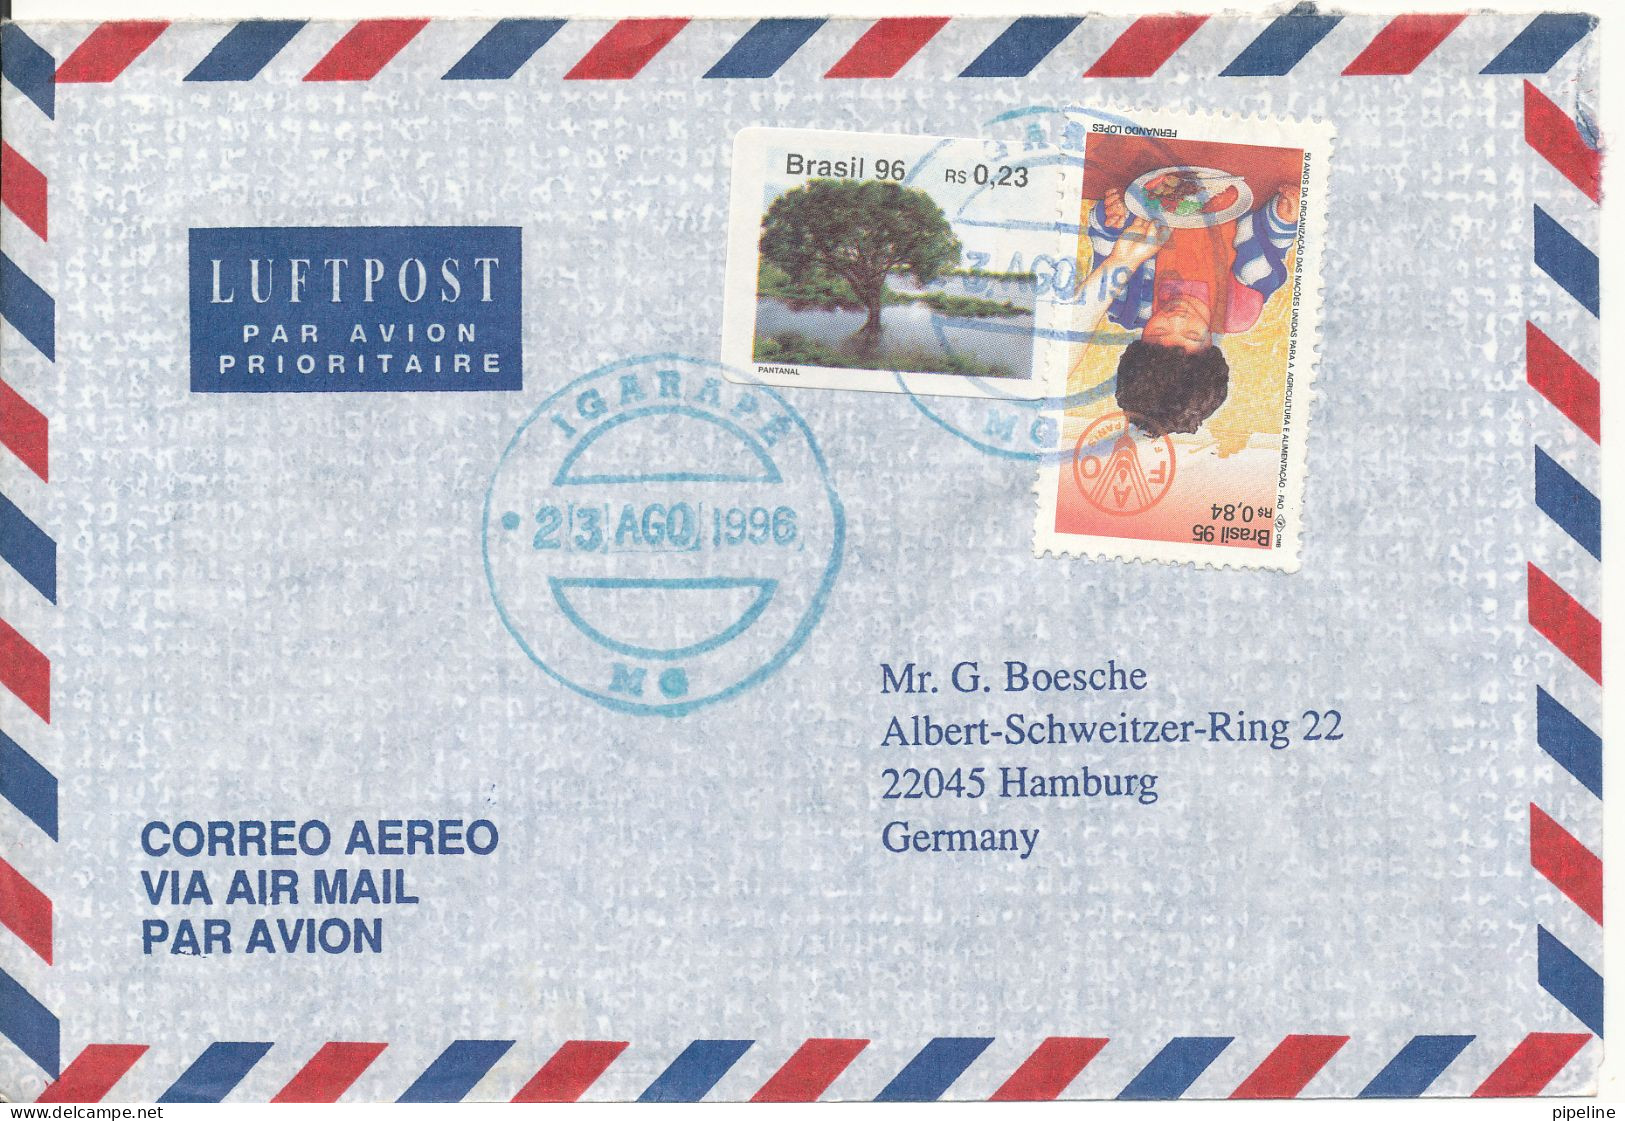 Brazil Air Mail Cover Sent To Germany 23-10-1996 Topic Stamps - Posta Aerea